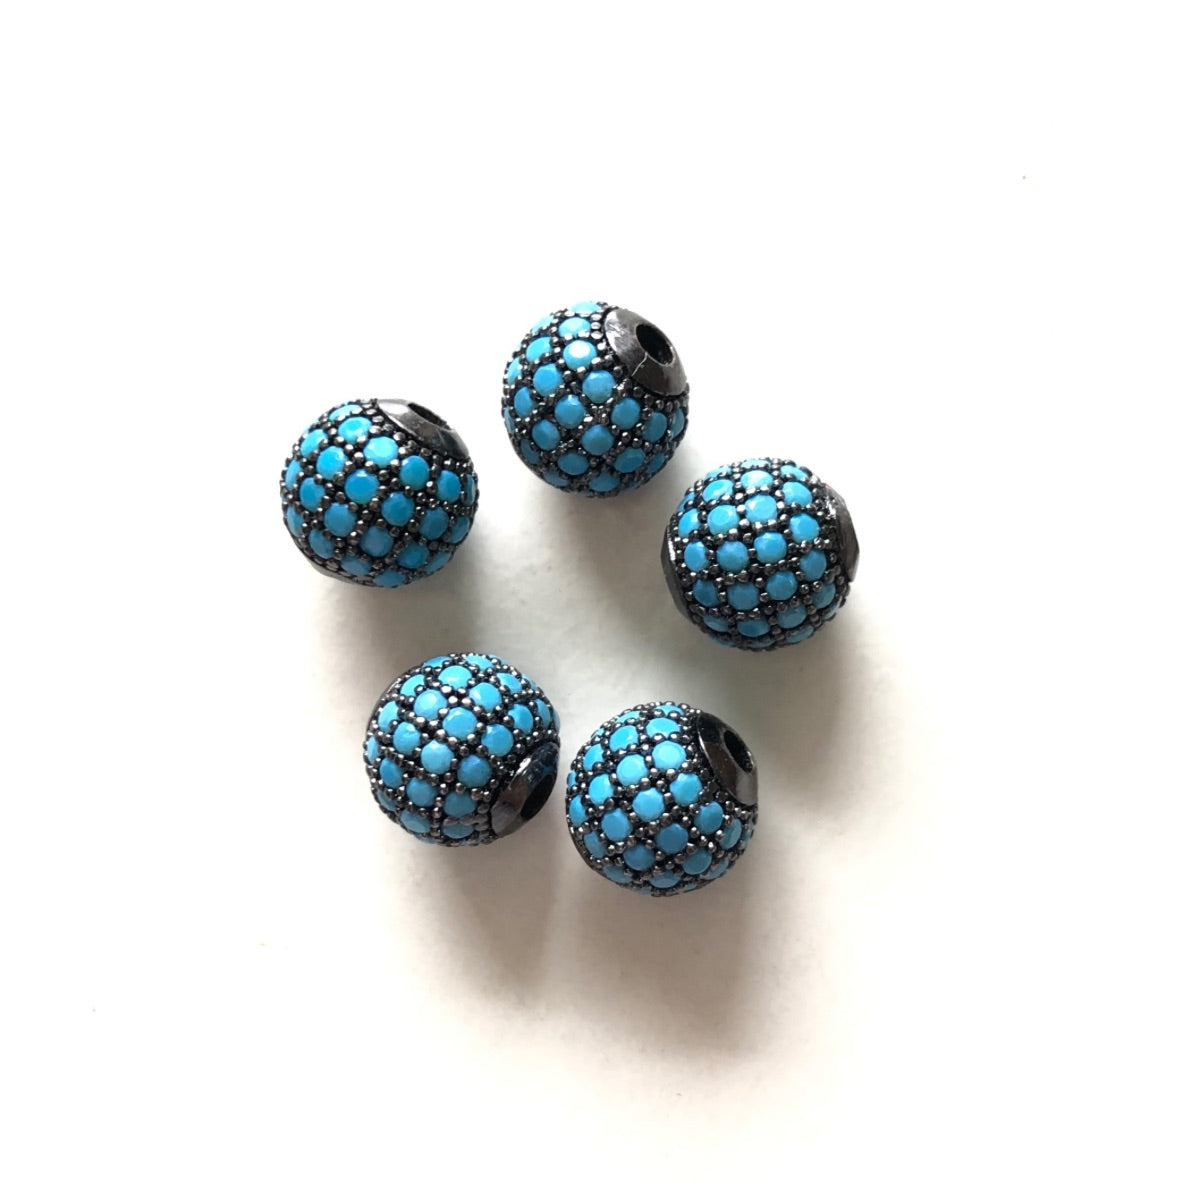 10pcs/lot 6mm, 8mm Colorful CZ Paved Ball Spacers Black Turquoise CZ Paved Spacers 6mm Beads 8mm Beads Ball Beads Colorful Zirconia New Spacers Arrivals Charms Beads Beyond